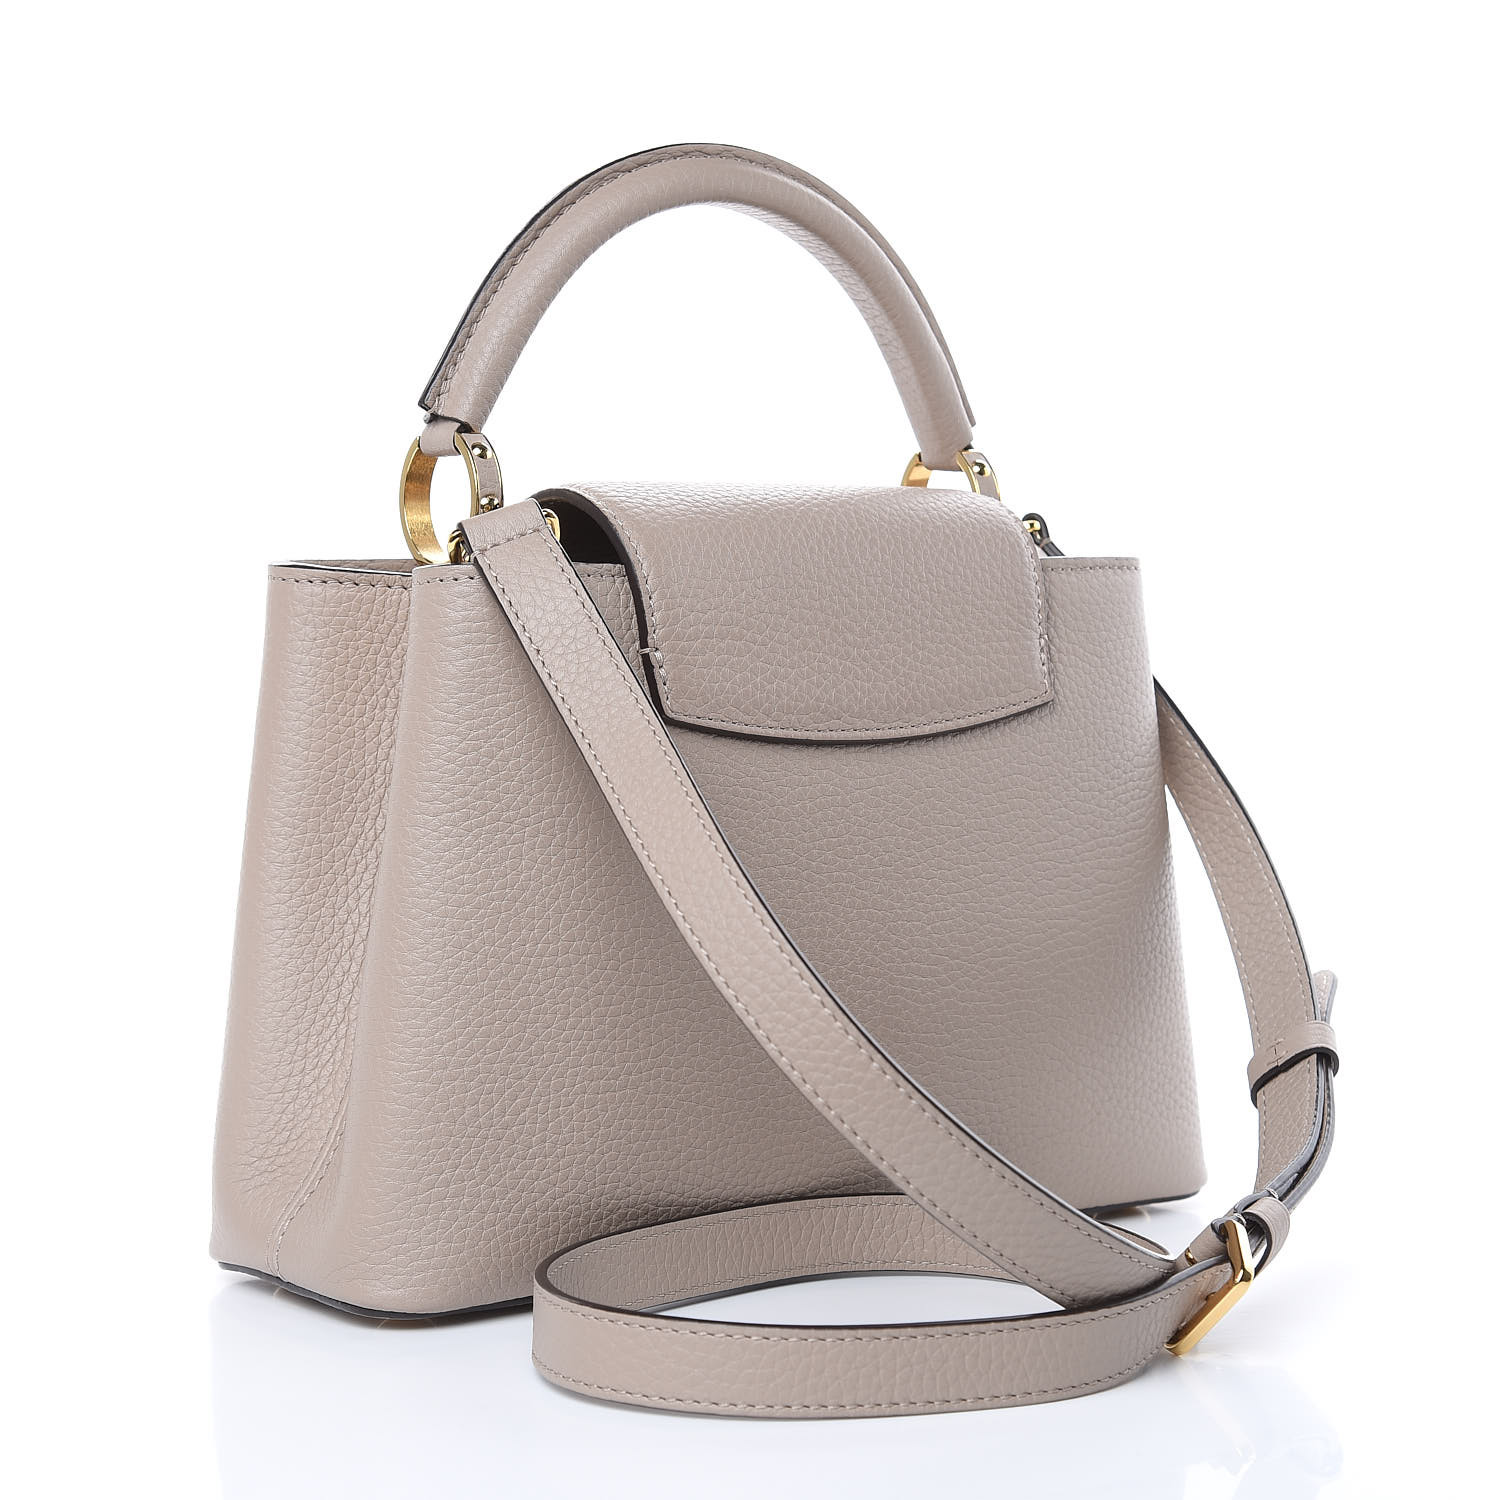 Louis Vuitton Capucines BB in Galet Grey Taurillon with Gold Hardware - SOLD